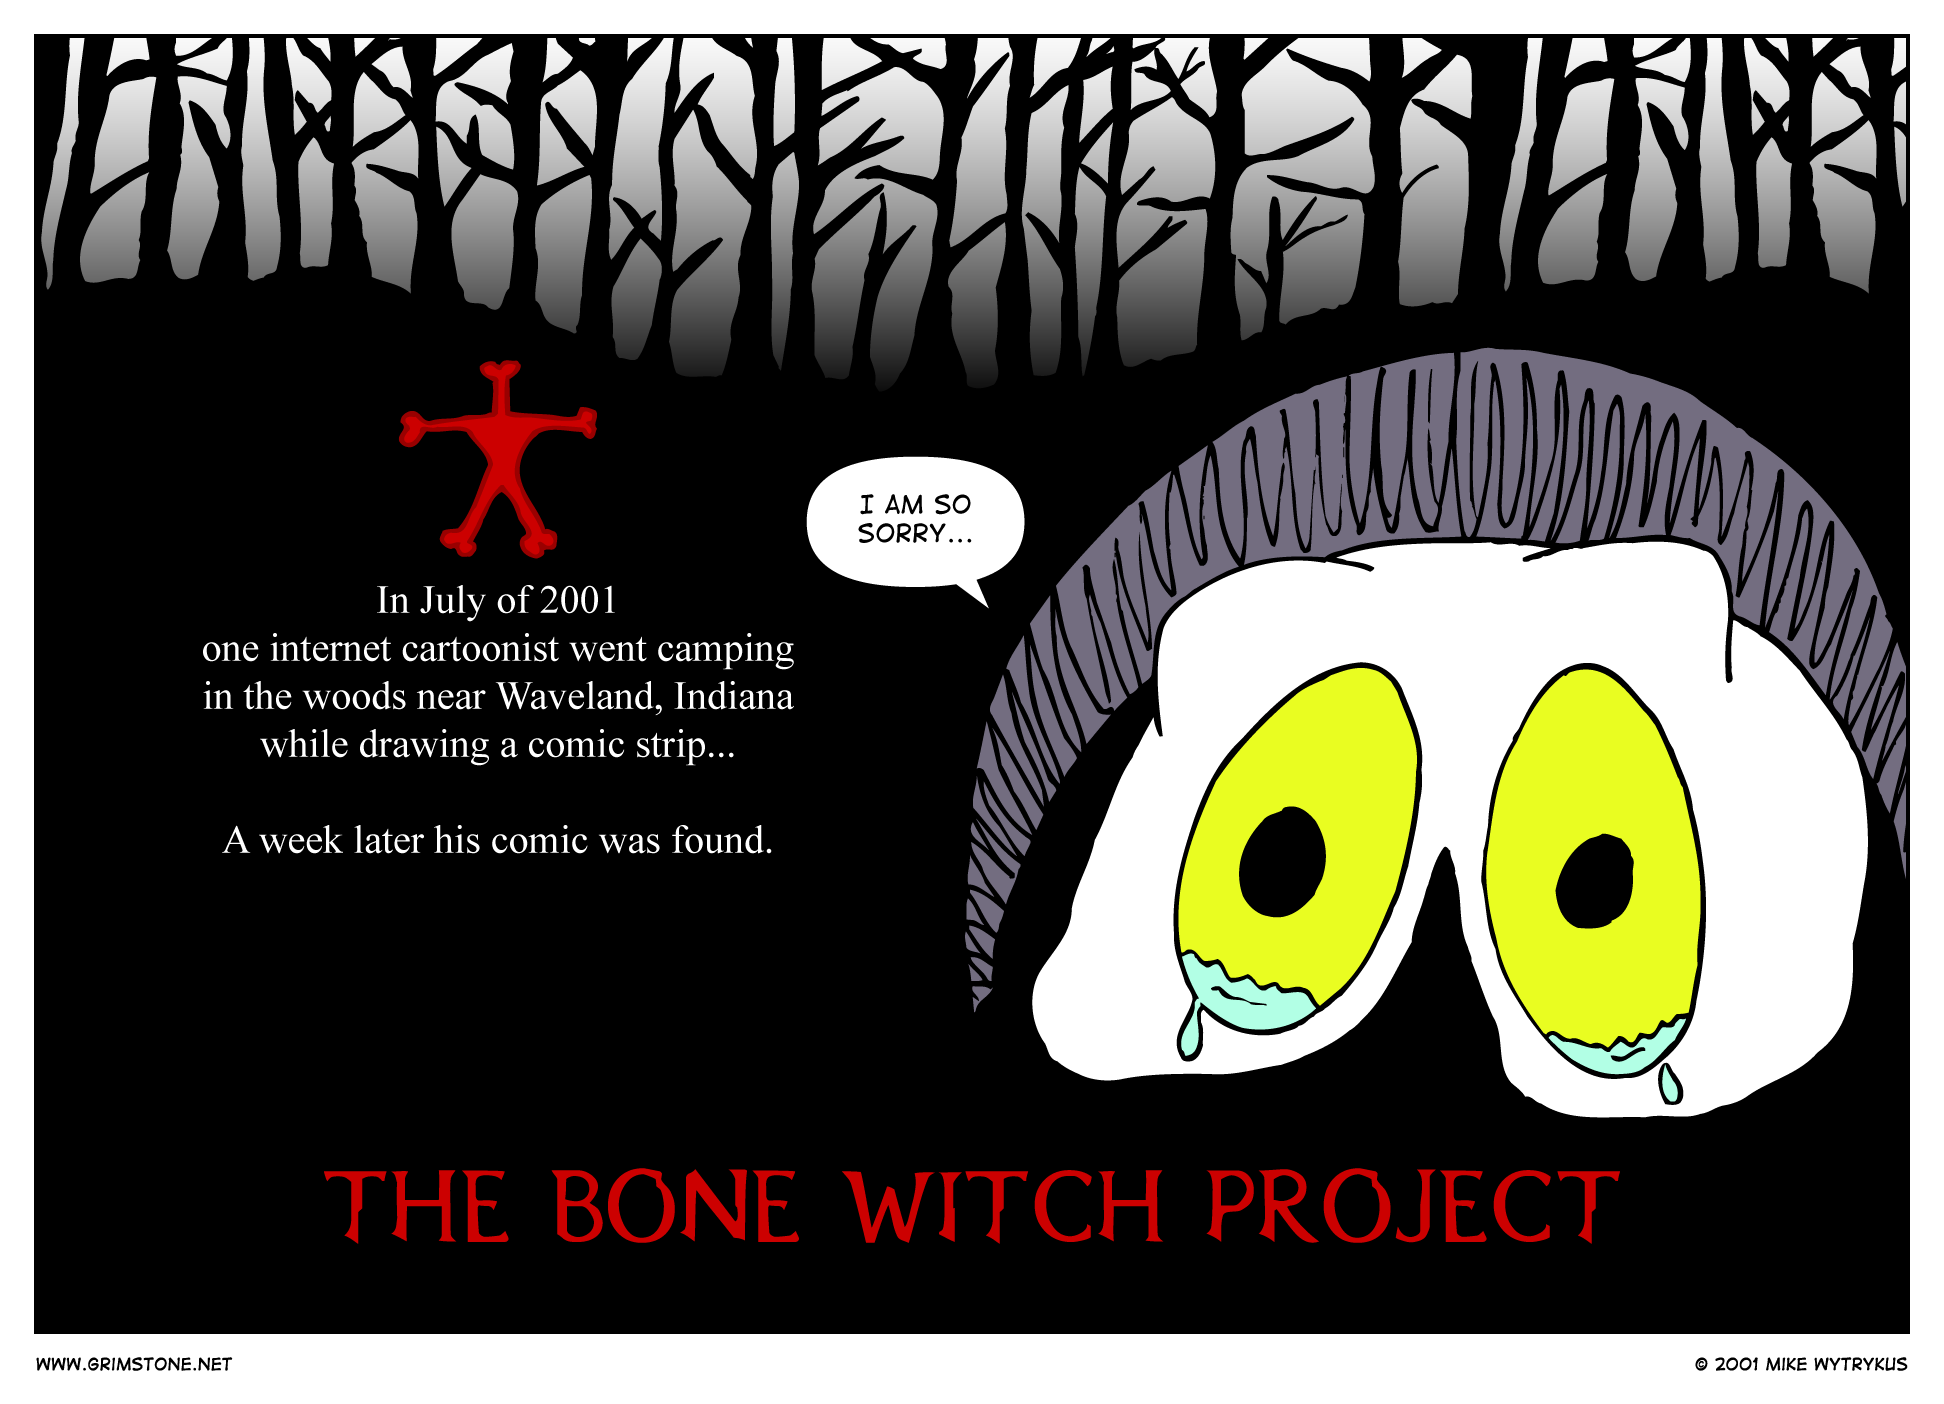 The Bone Witch Project